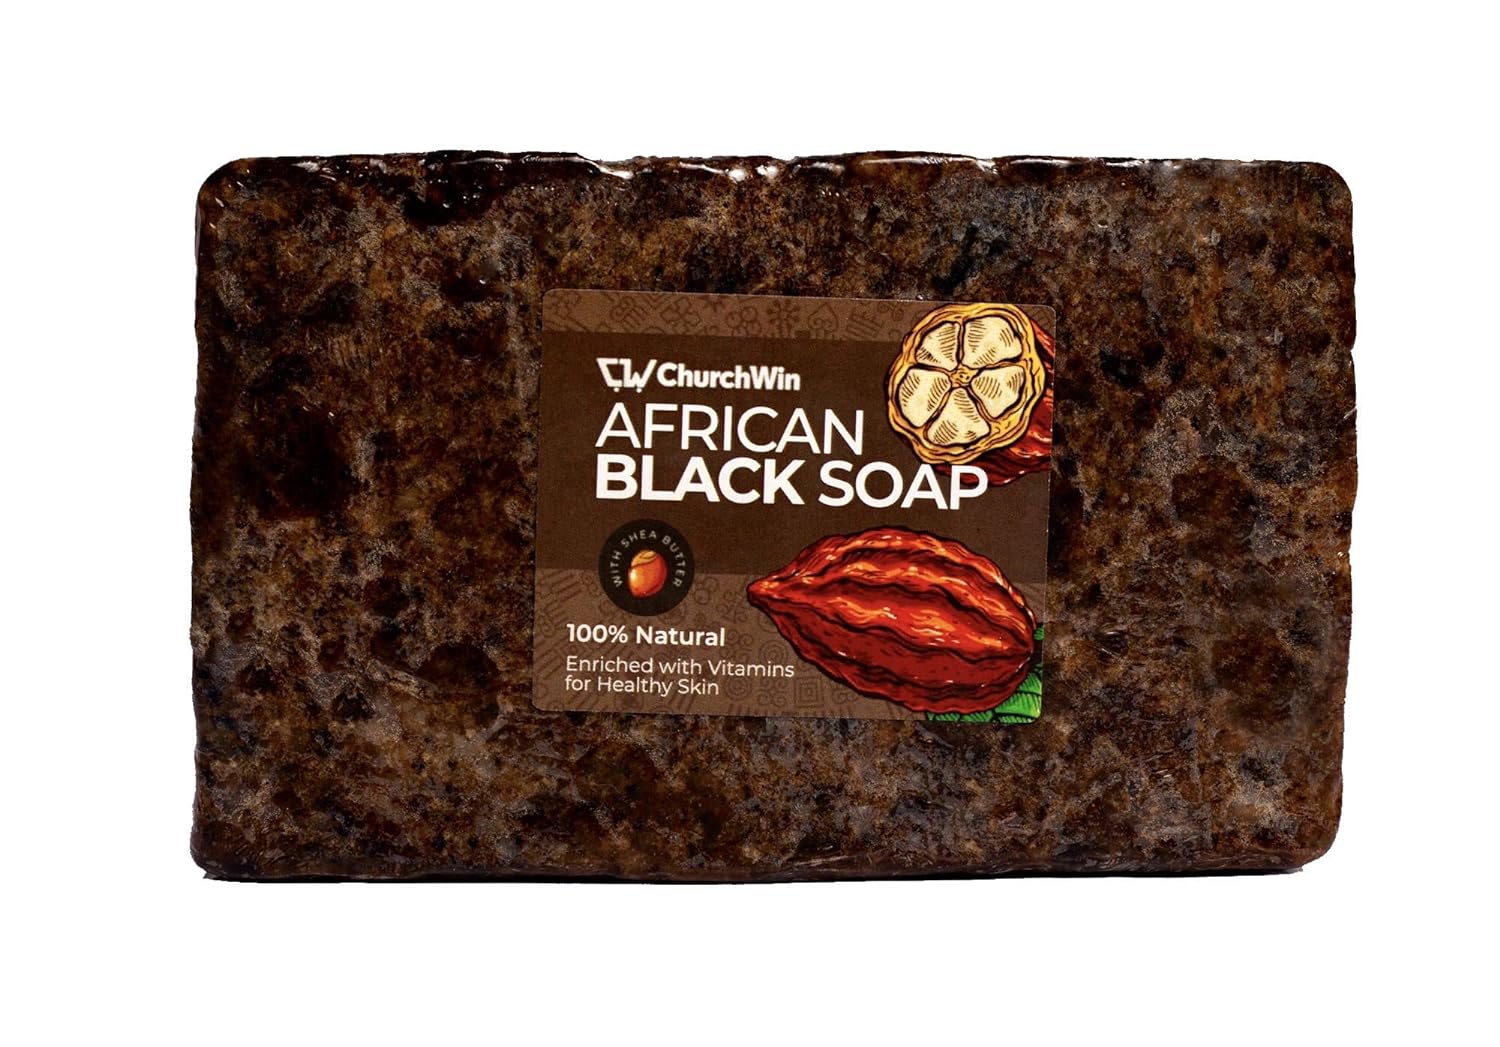 Churchwin African Black Soap, 1LB/16 /500g Organic 100% l, For Acne and eczema, Dry Skin & Rashes, Face & Body Wash, All Skin Types, Authentic Handmade Soap, Pure Raw Ingredients. 1Lb(16 )